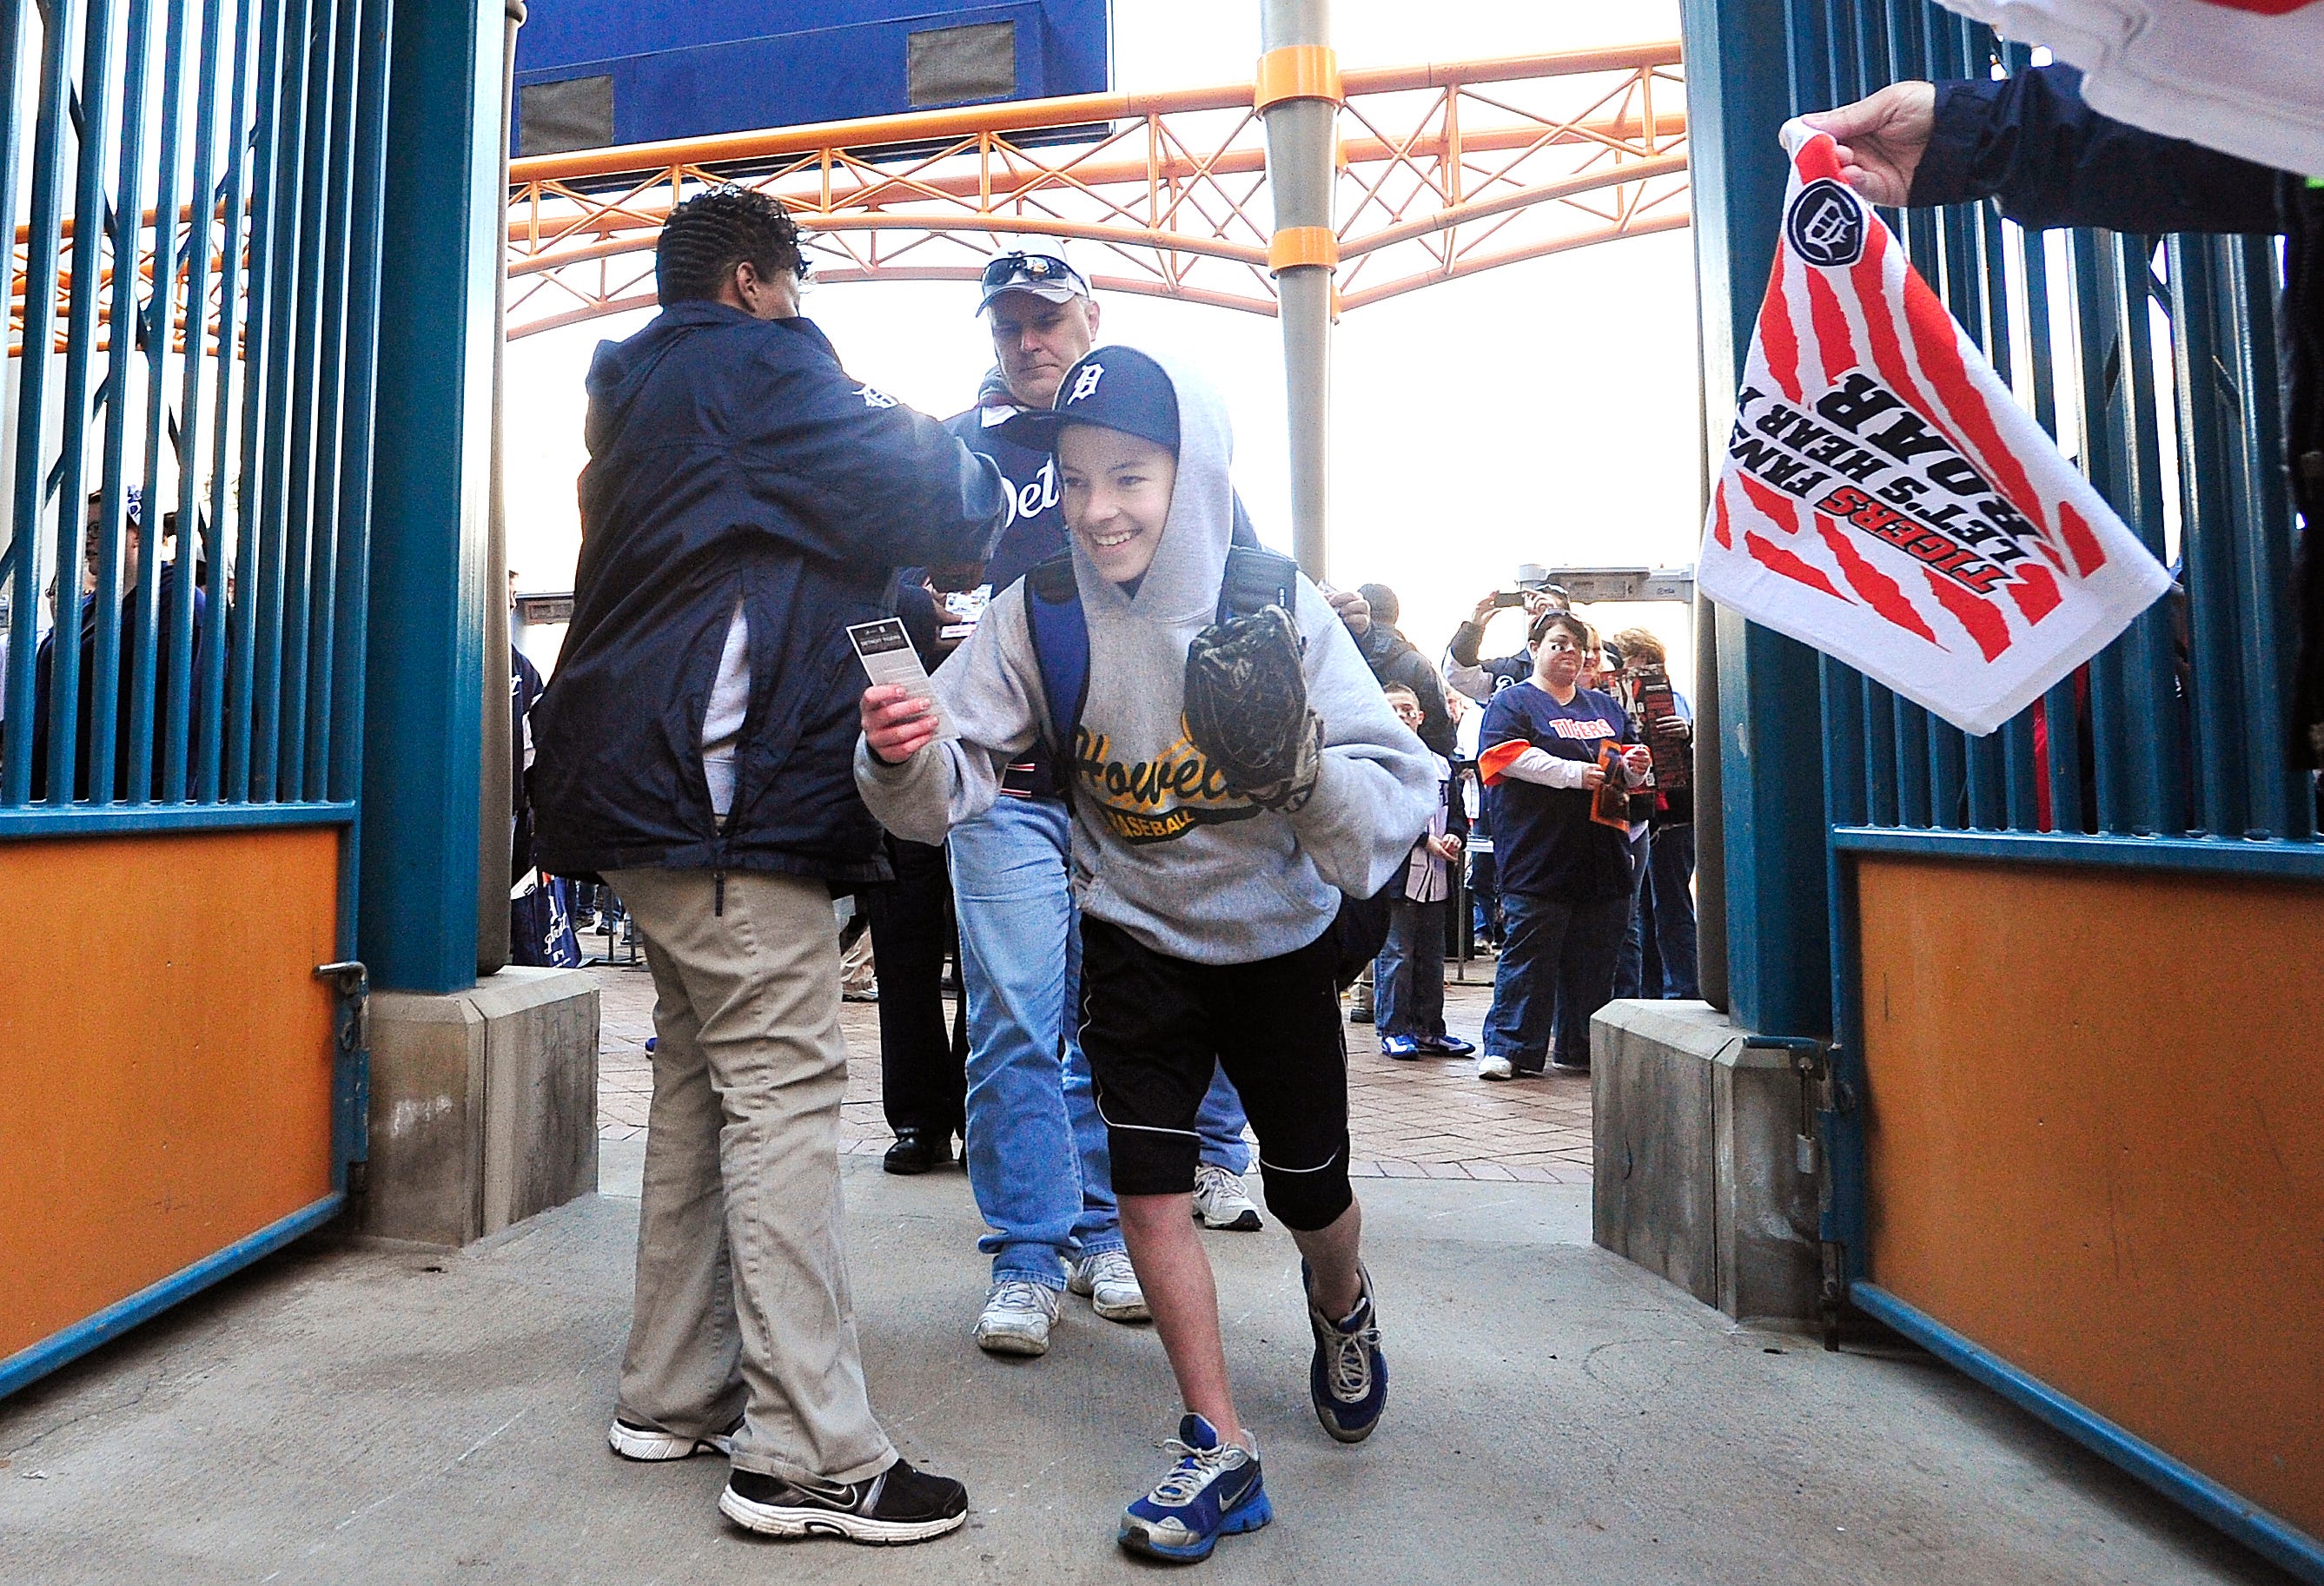 Allen Couet, 14 is one of the first to get into the gates at Comerica Park for the Opening Day festivities. Detroit Tigers Opening Day vs the Kansas City Royal at Comerica Park in Detroit, Michigan on March 31, 2014.